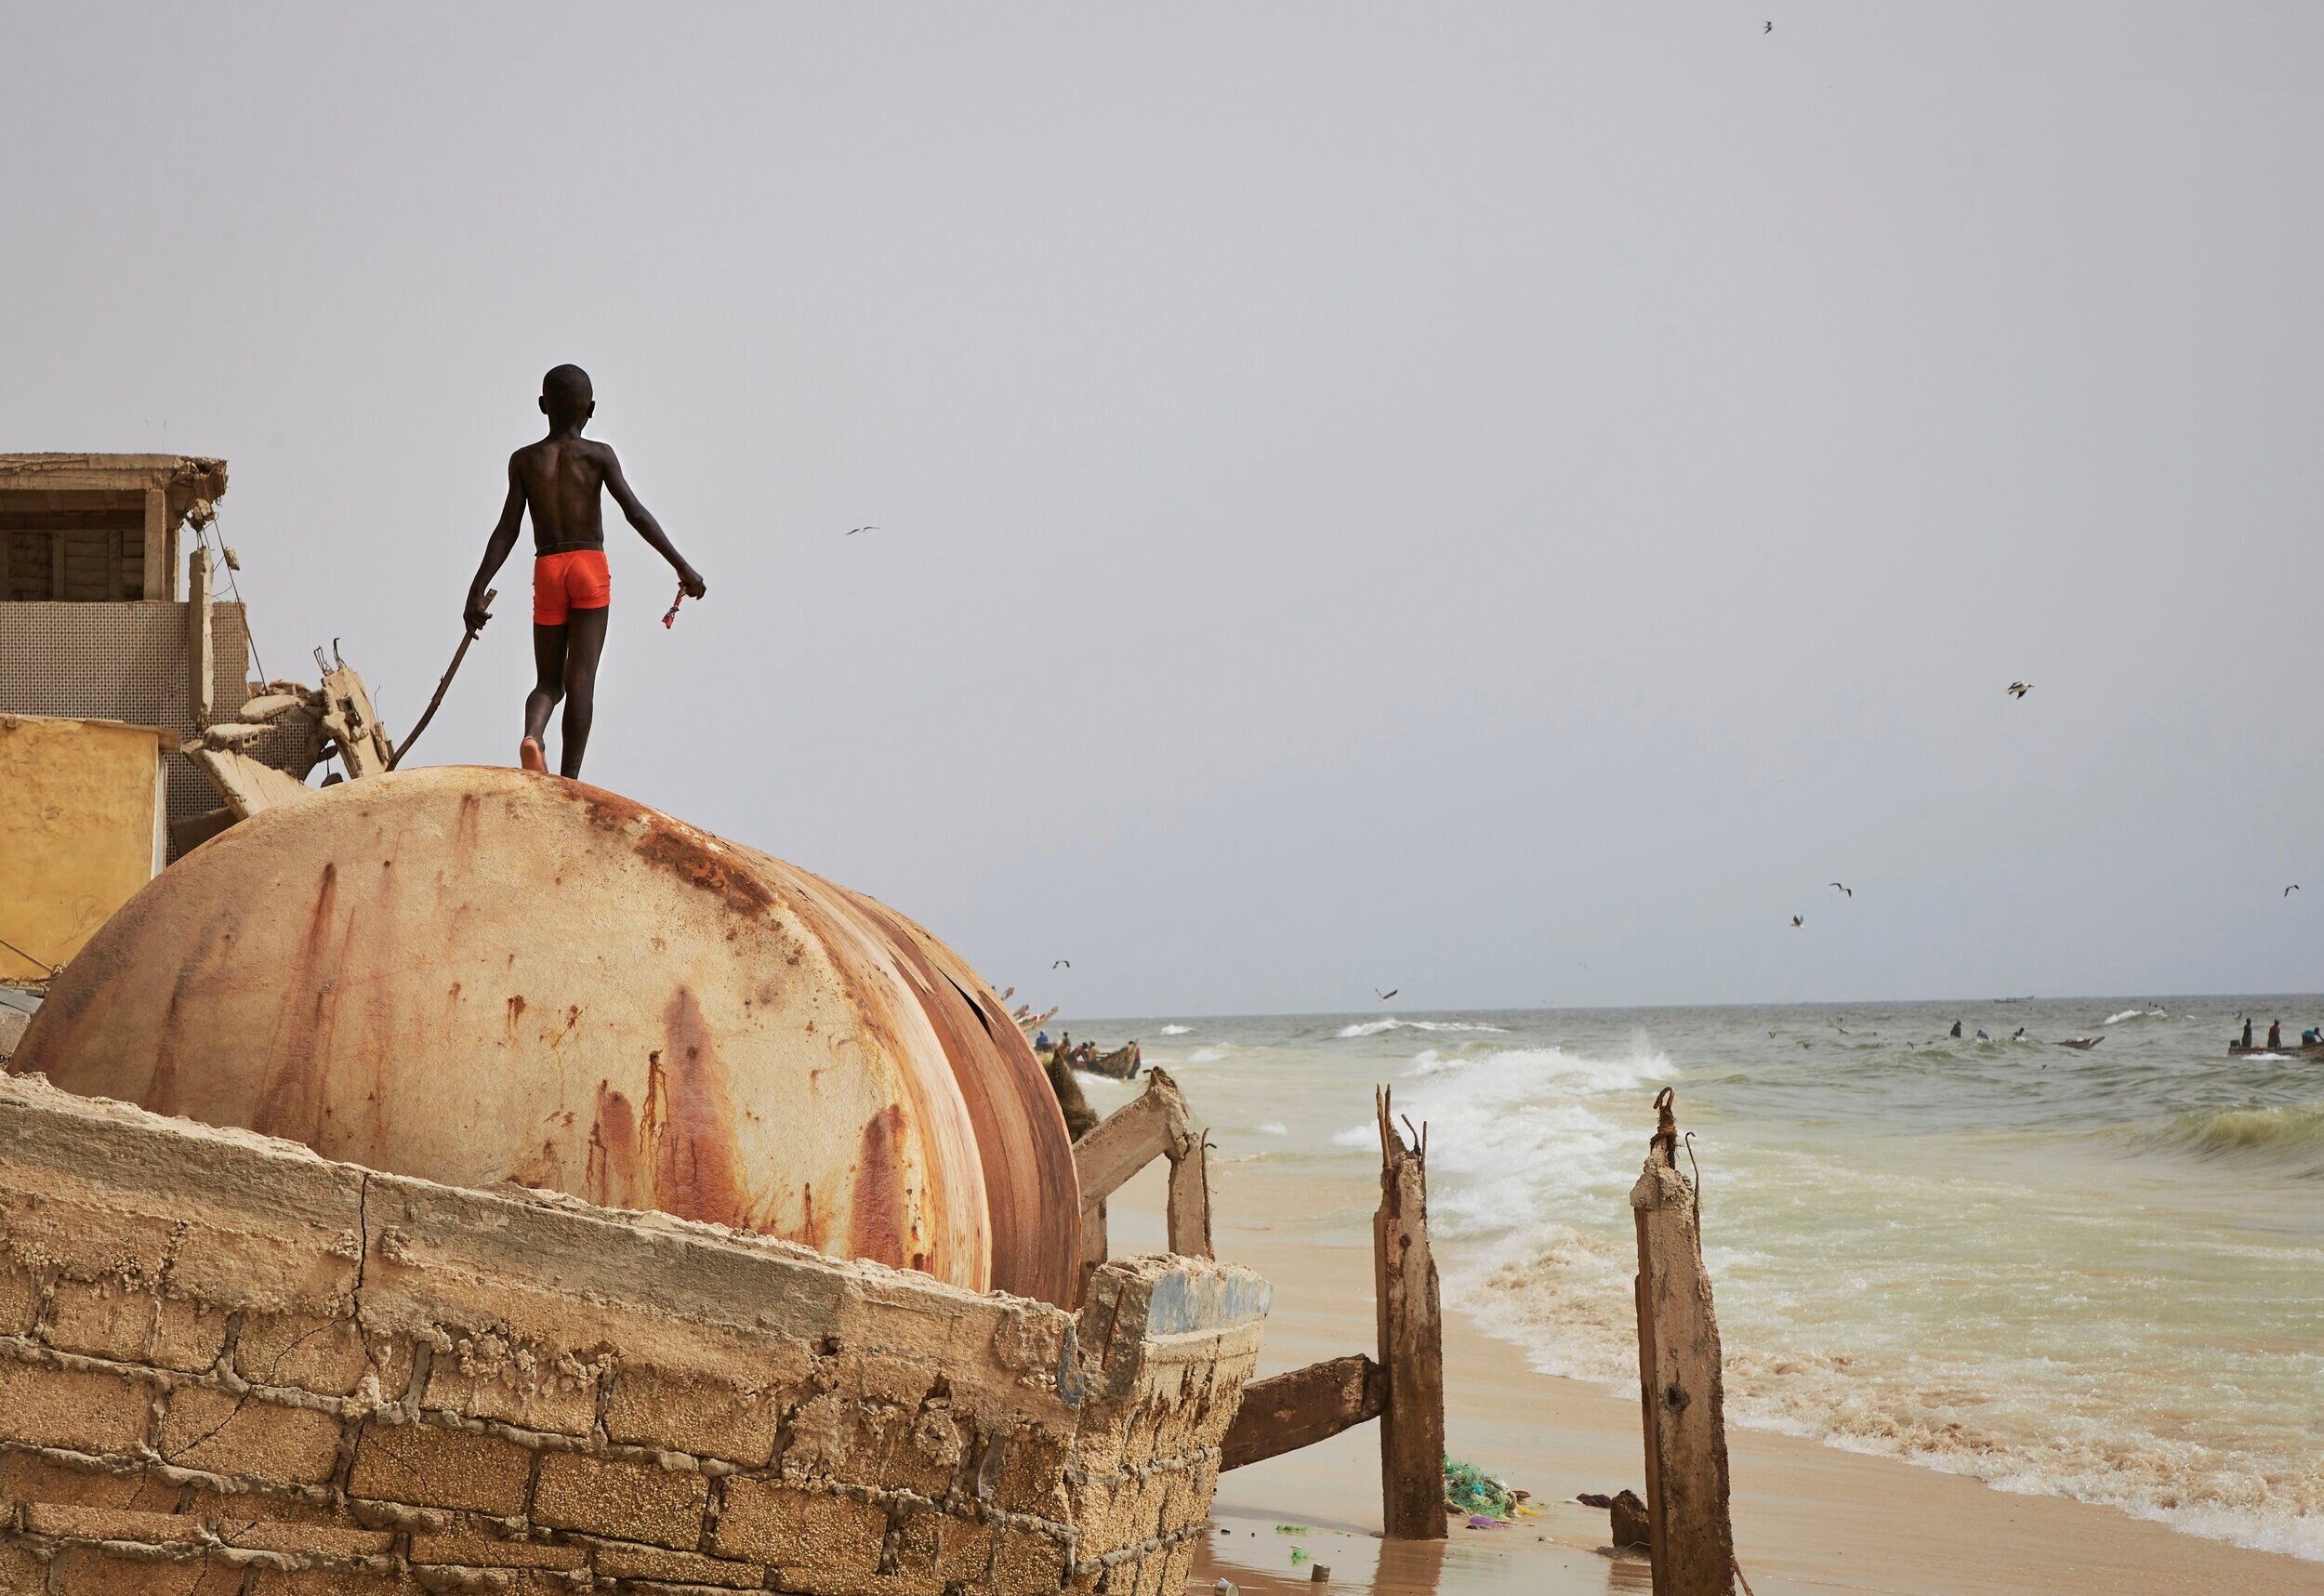  A child plays on the ruins of a sea wall after the ocean surge.  Saint Louis, Senegal 